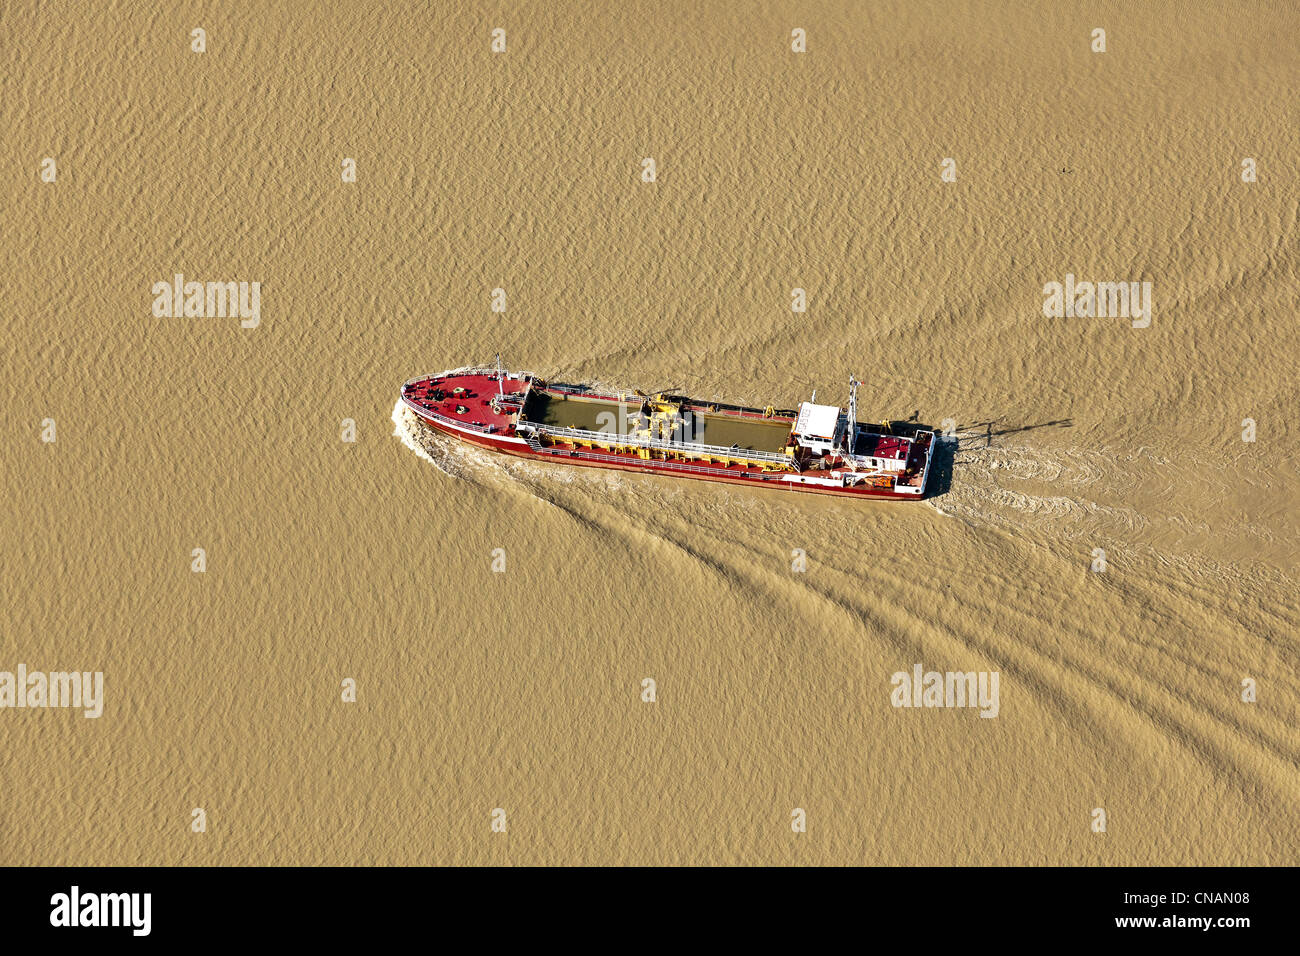 France, Loire-Atlantique, Indre, boat on the Loire river (aerial photography) Stock Photo